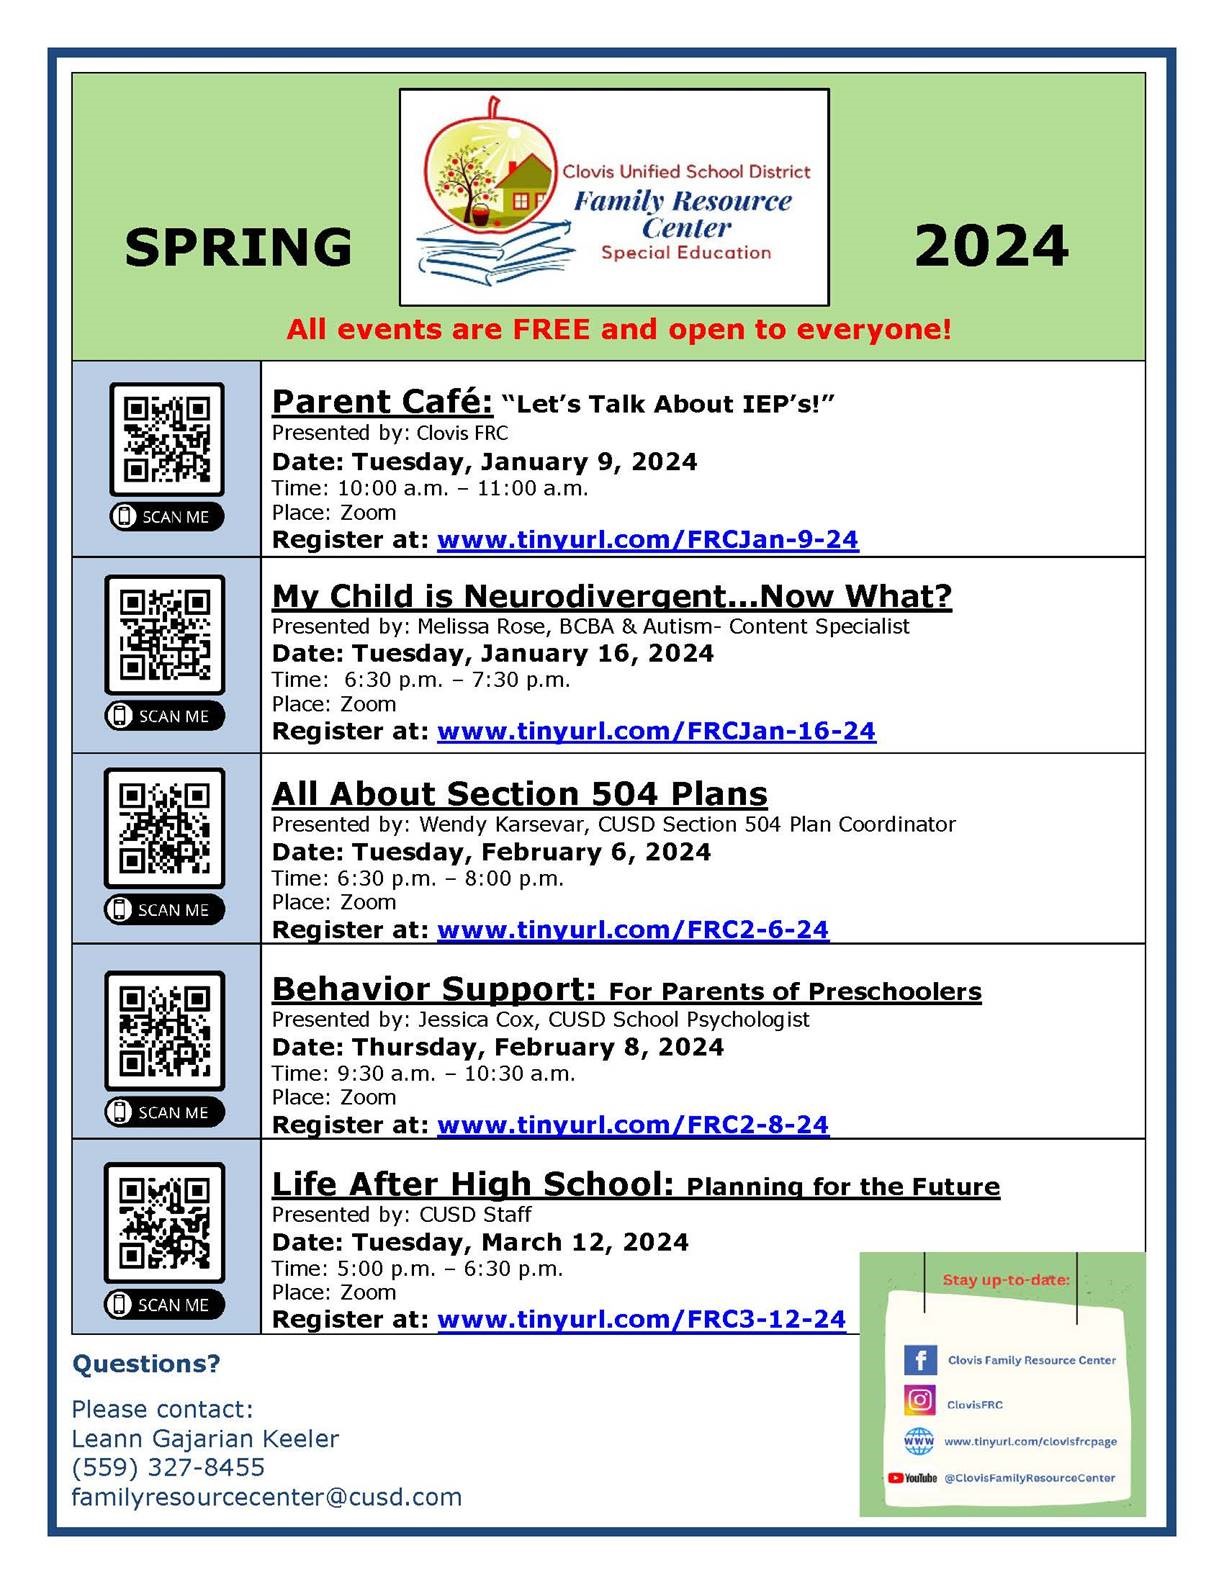 2024 SPRING All events are FREE and open to everyone! Parent Café: “Let’s Talk About IEP’s!” Presented by: Clovis FRC Date: Tuesday, January 9, 2024 Time: 10:00 a.m. – 11:00 a.m. Place: Zoom Register at: www.tinyurl.com/FRCJan-9-24 My Child is Neurodivergent...Now What? Presented by: Melissa Rose, BCBA & Autism- Content Specialist Date: Tuesday, January 16, 2024 Time: 6:30 p.m. – 7:30 p.m. Place: Zoom Register at: www.tinyurl.com/FRCJan-16-24 All About Section 504 Plans Presented by: Wendy Karsevar, CUSD Section 504 Plan Coordinator Date: Tuesday, February 6, 2024 Time: 6:30 p.m. – 8:00 p.m. Place: Zoom Register at: www.tinyurl.com/FRC2-6-24 Behavior Support: For Parents of Preschoolers Presented by: Jessica Cox, CUSD School Psychologist Date: Thursday, February 8, 2024 Time: 9:30 a.m. – 10:30 a.m. Place: Zoom Register at: www.tinyurl.com/FRC2-8-24 Life After High School: Planning for the FuturePresented by: CUSD Staff Date: Tuesday, March 12, 2024 Time: 5:00 p.m. – 6:30 p.m. Place: Zoom Register at: www.tinyurl.com/FRC3-12-24 Questions? Please contact: Leann Gajarian Keeler (559)327-8455familyresourcecenter@cusd.com